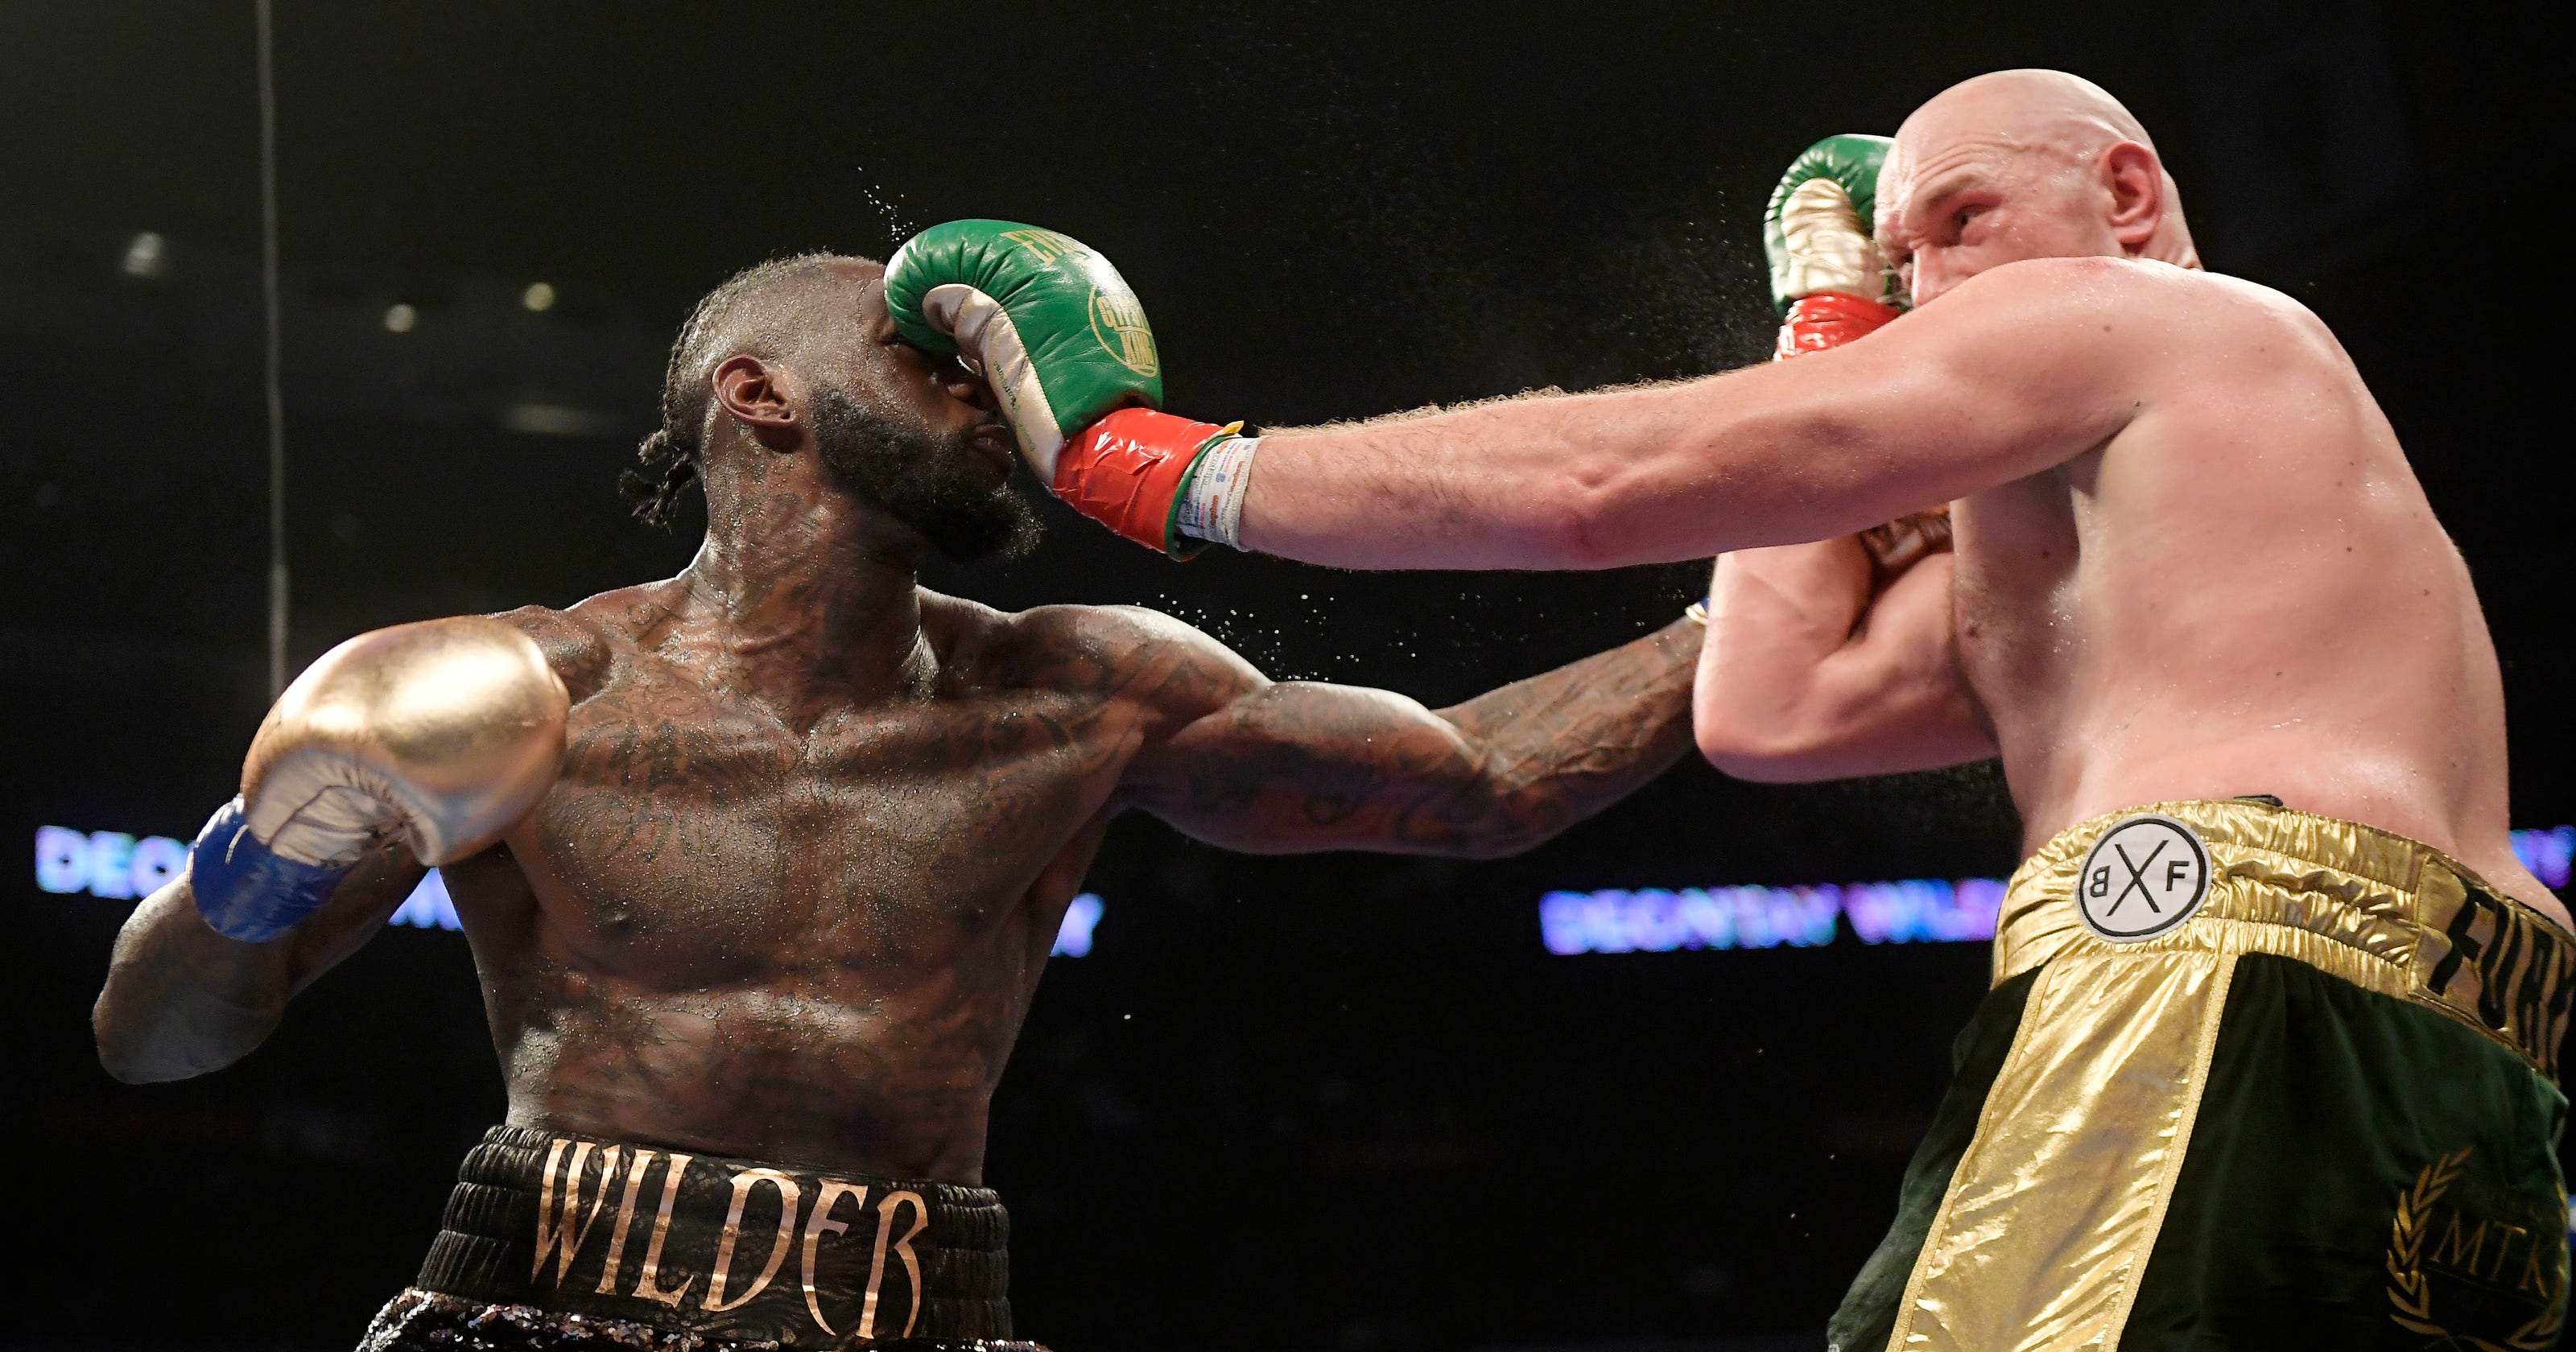 Wilder-Fury fight lived up to the hype